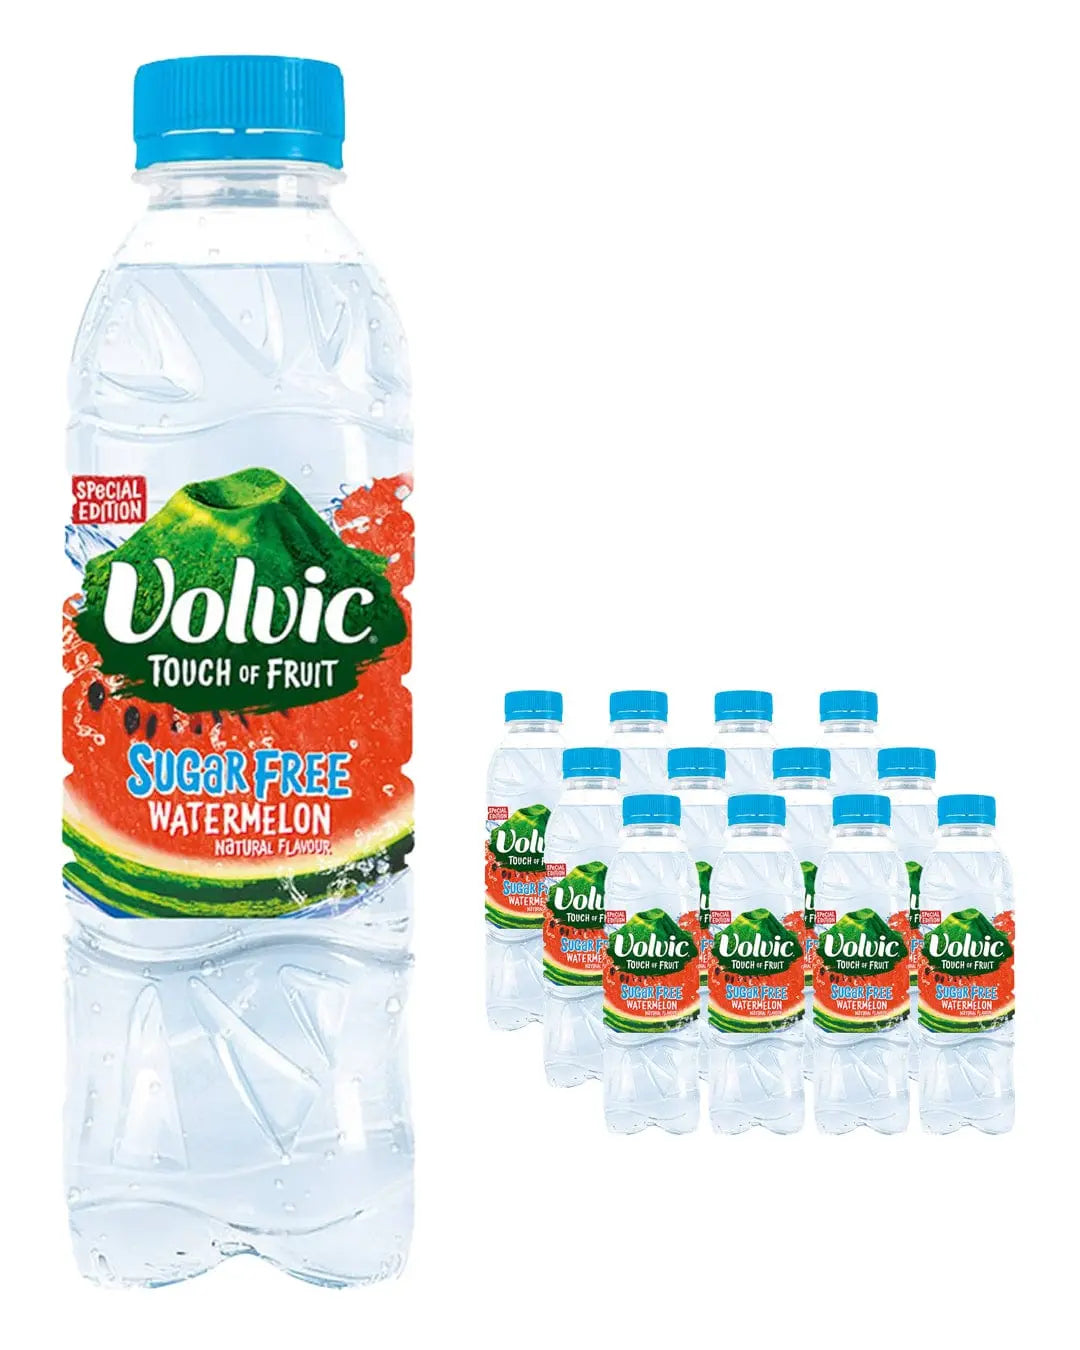 Volvic Sugar Free Touch of Fruit Watermelon Flavoured Water Multipack, 12 x 500 ml Water